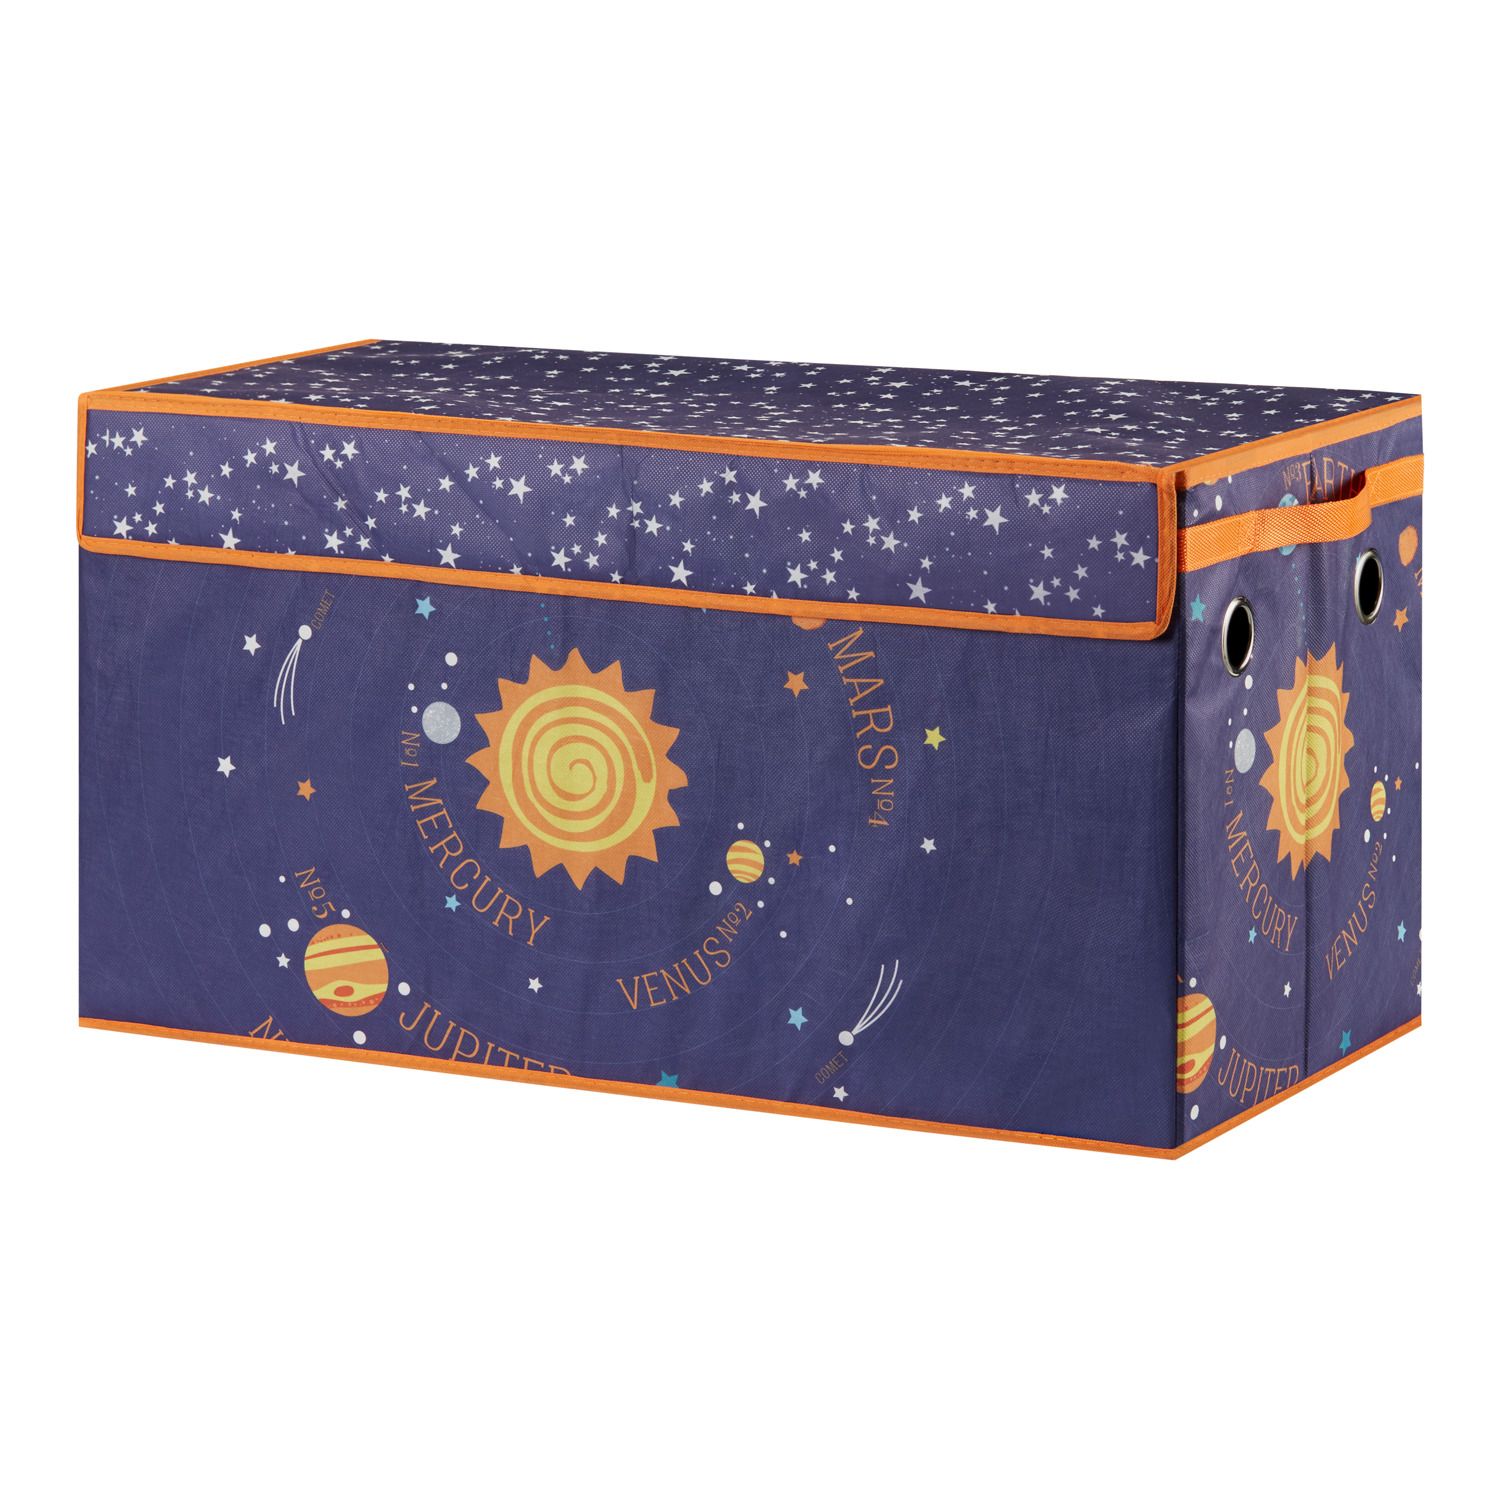 outer space toy box